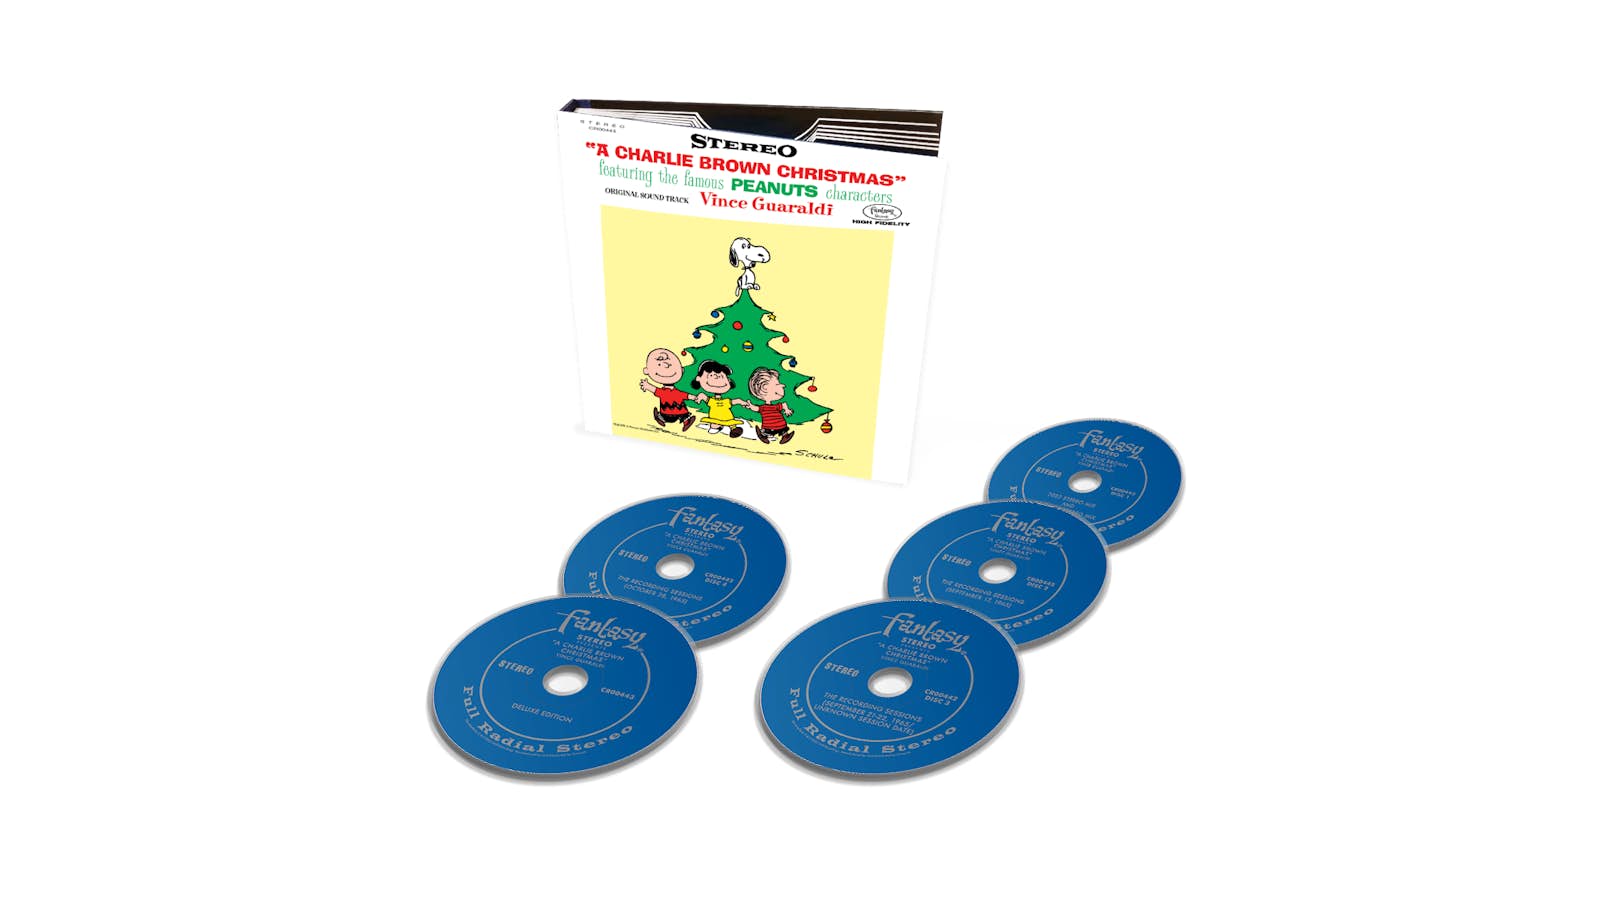 A Charlie Brown Christmas: Super Deluxe Edition